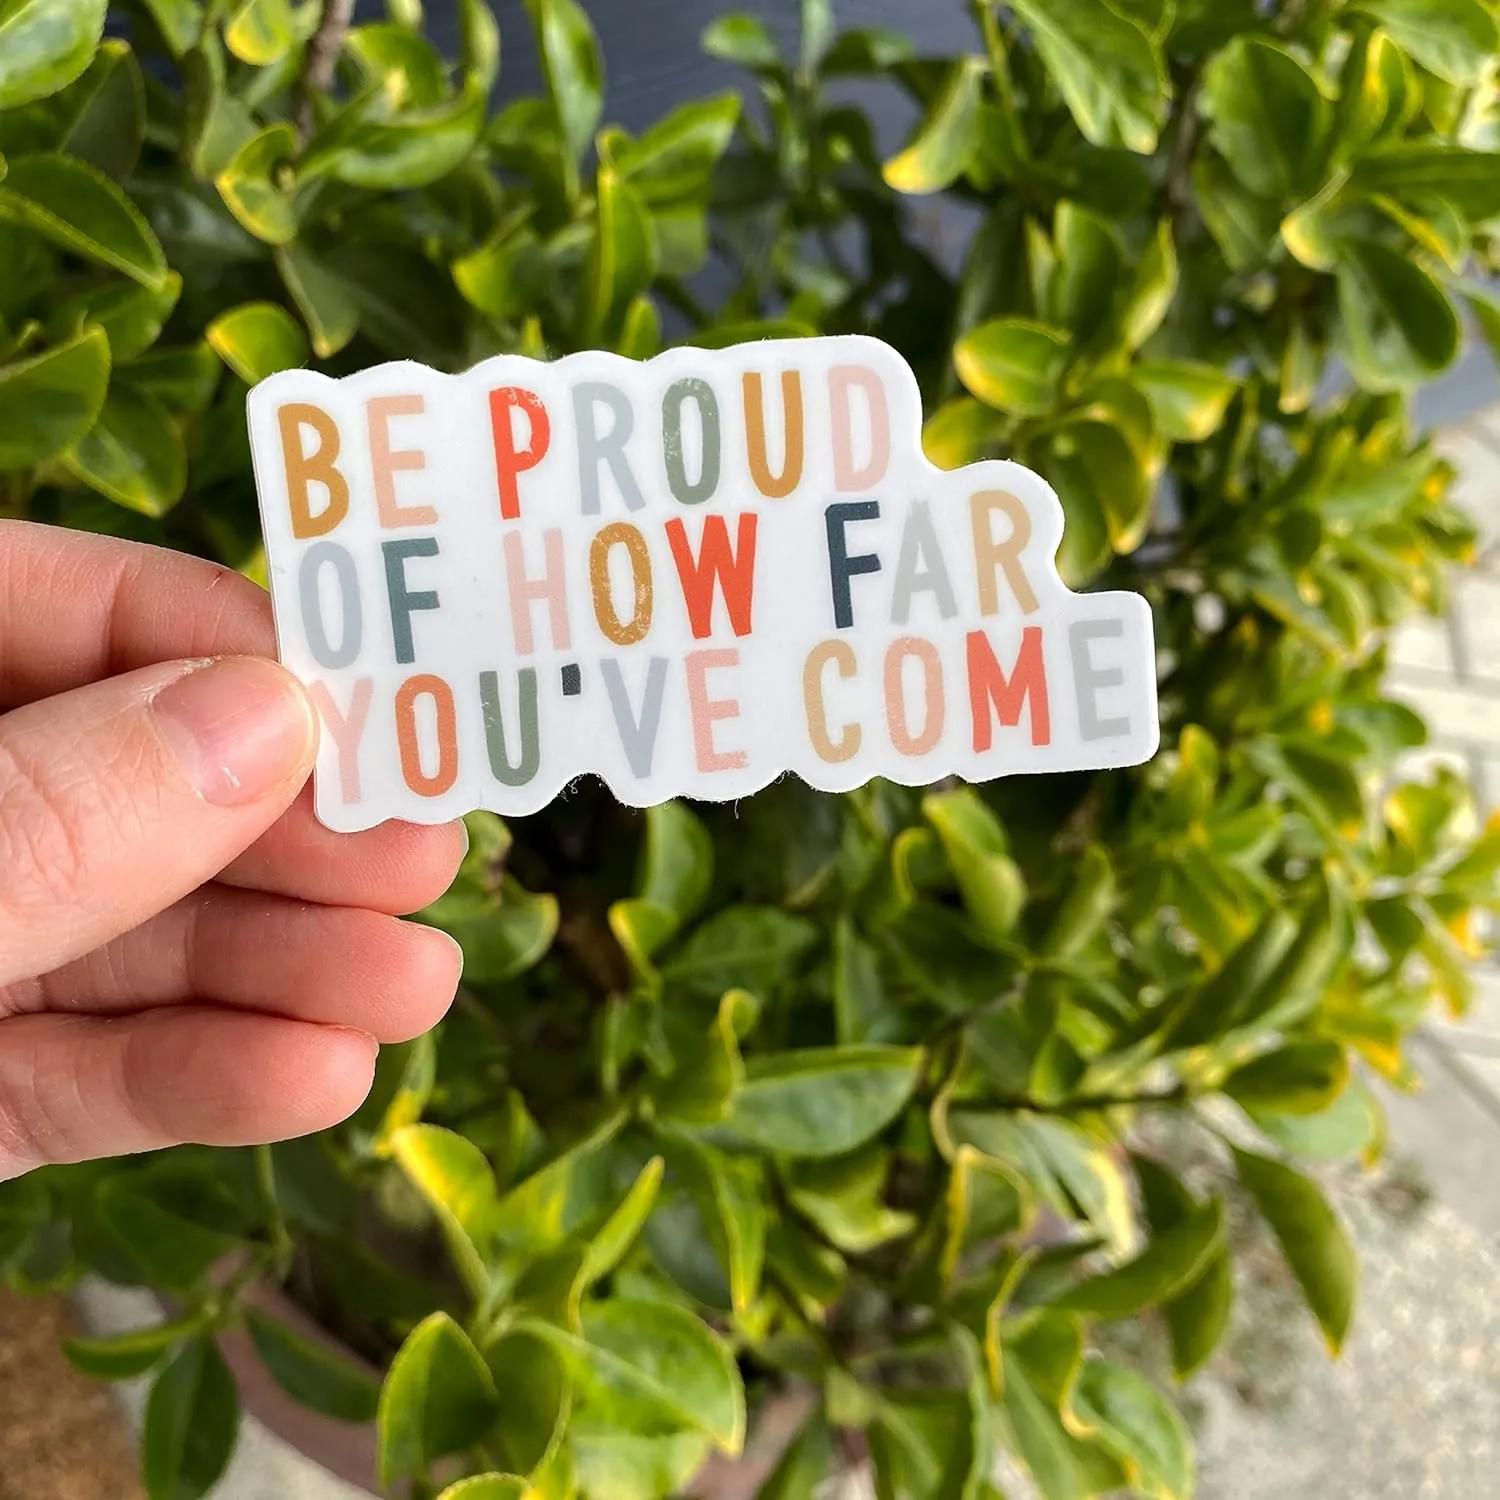 Be proud of how Far you've come | Waterproof  inspirational stickers | Positive sticker quotes | Self care sticker | Be proud sticker | Inspirational saying decal | Self love stick